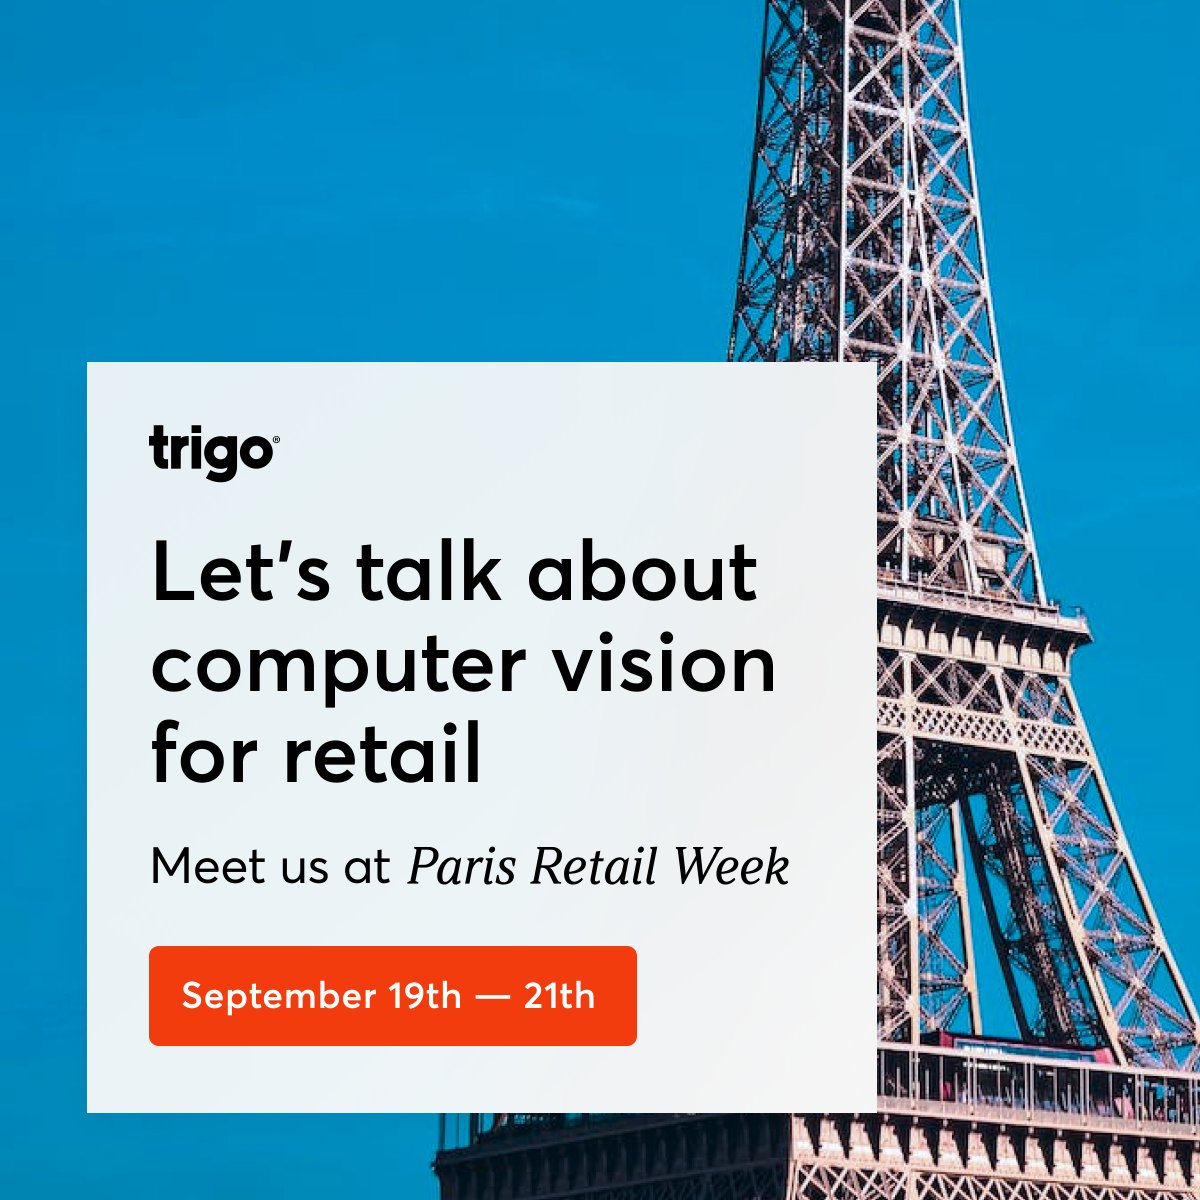 📣 Tomorrow 📣 Our team is attending Paris Retail Week! Come meet us to discuss computer vision for retail, data-driven stores, and retail automation. Reach out to book a meeting: bit.ly/3ZkuboM #ParisRetailWeek #ComputerVision #DataDrivenStores #RetailAutomation